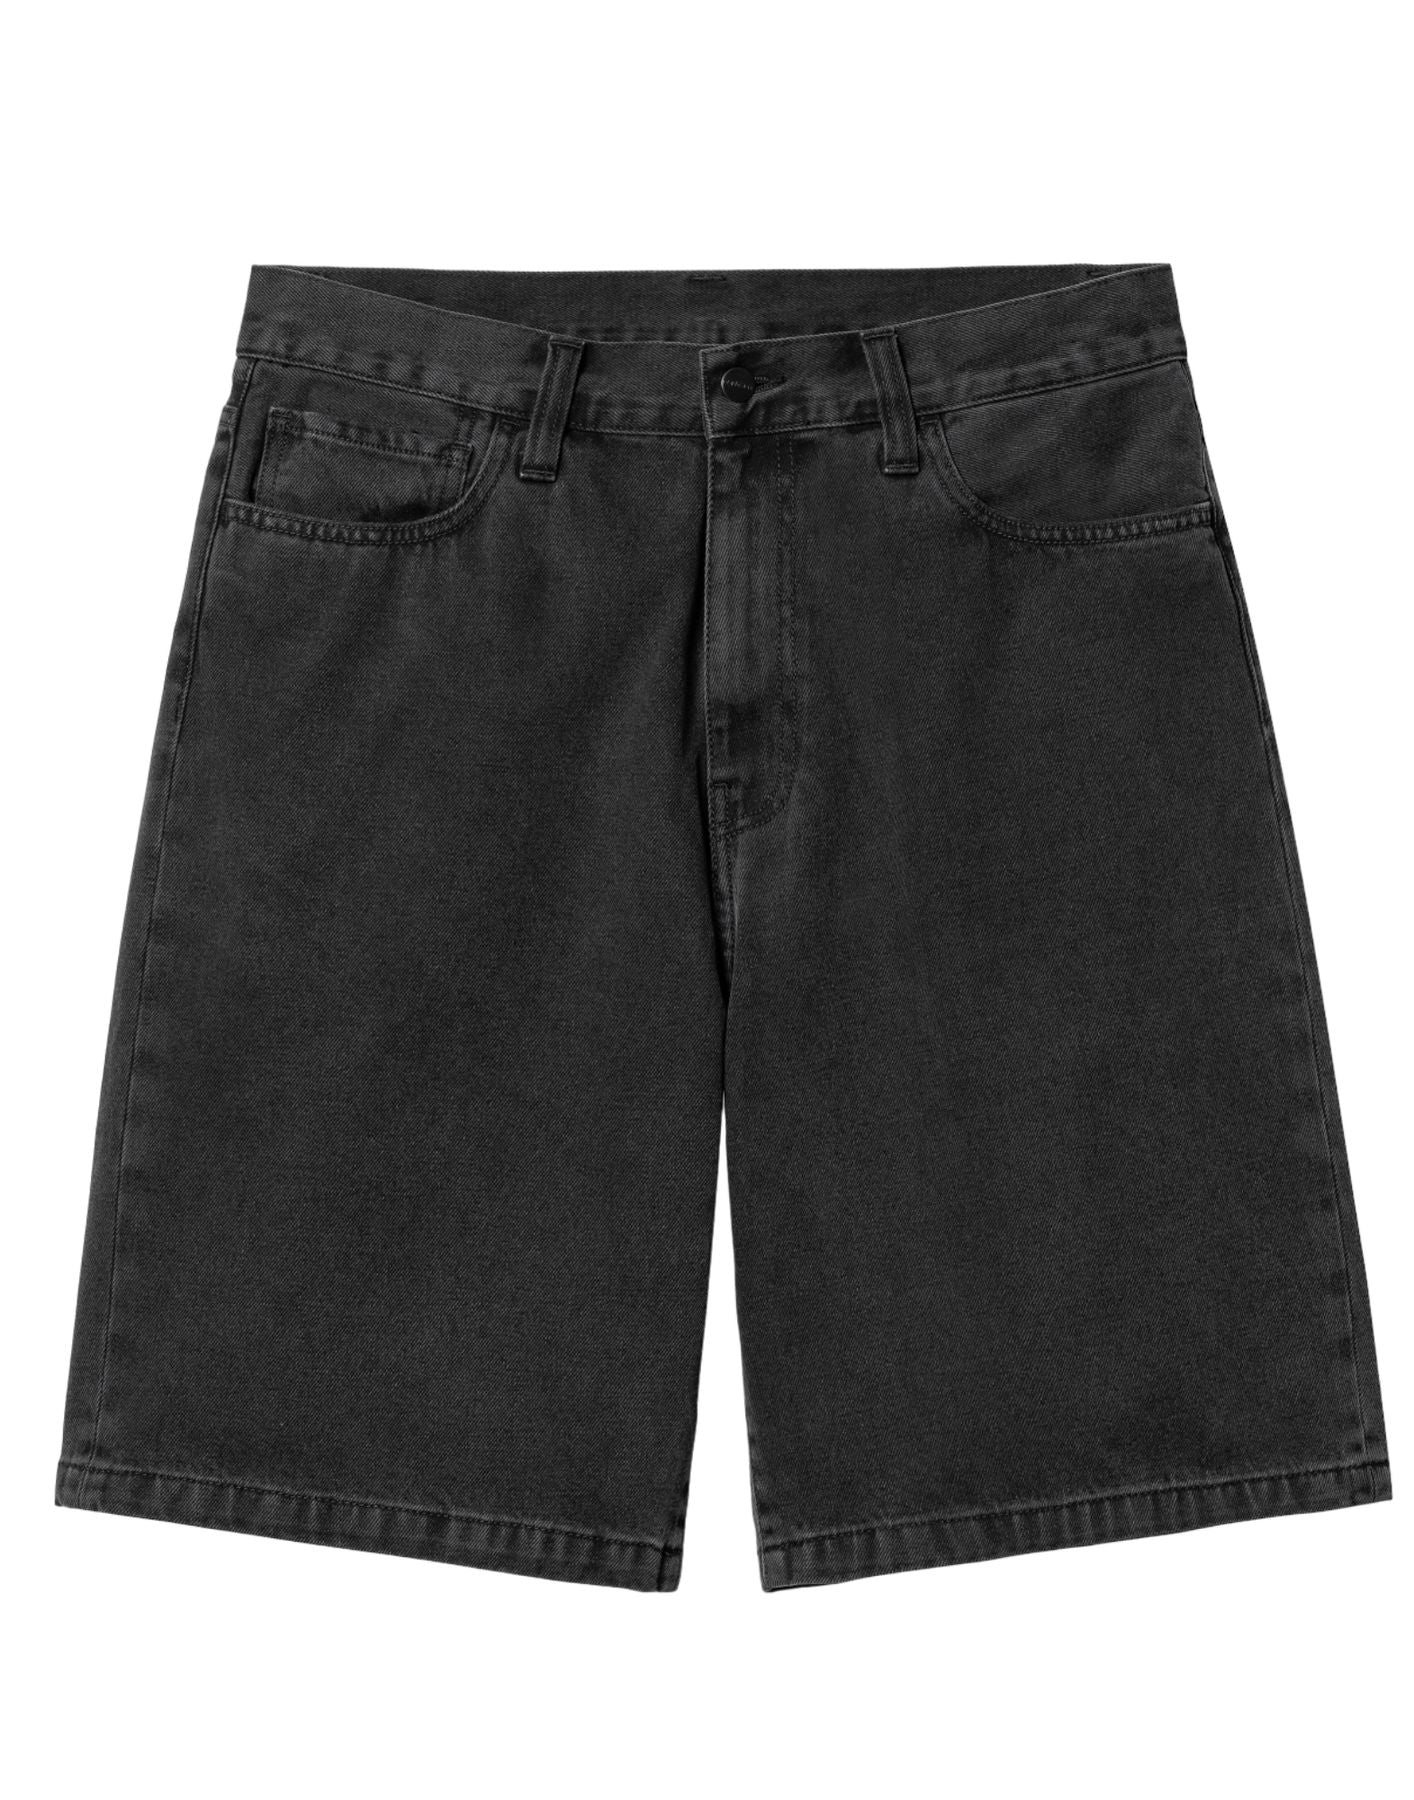 Shorts pour homme I030469 8906 CARHARTT WIP